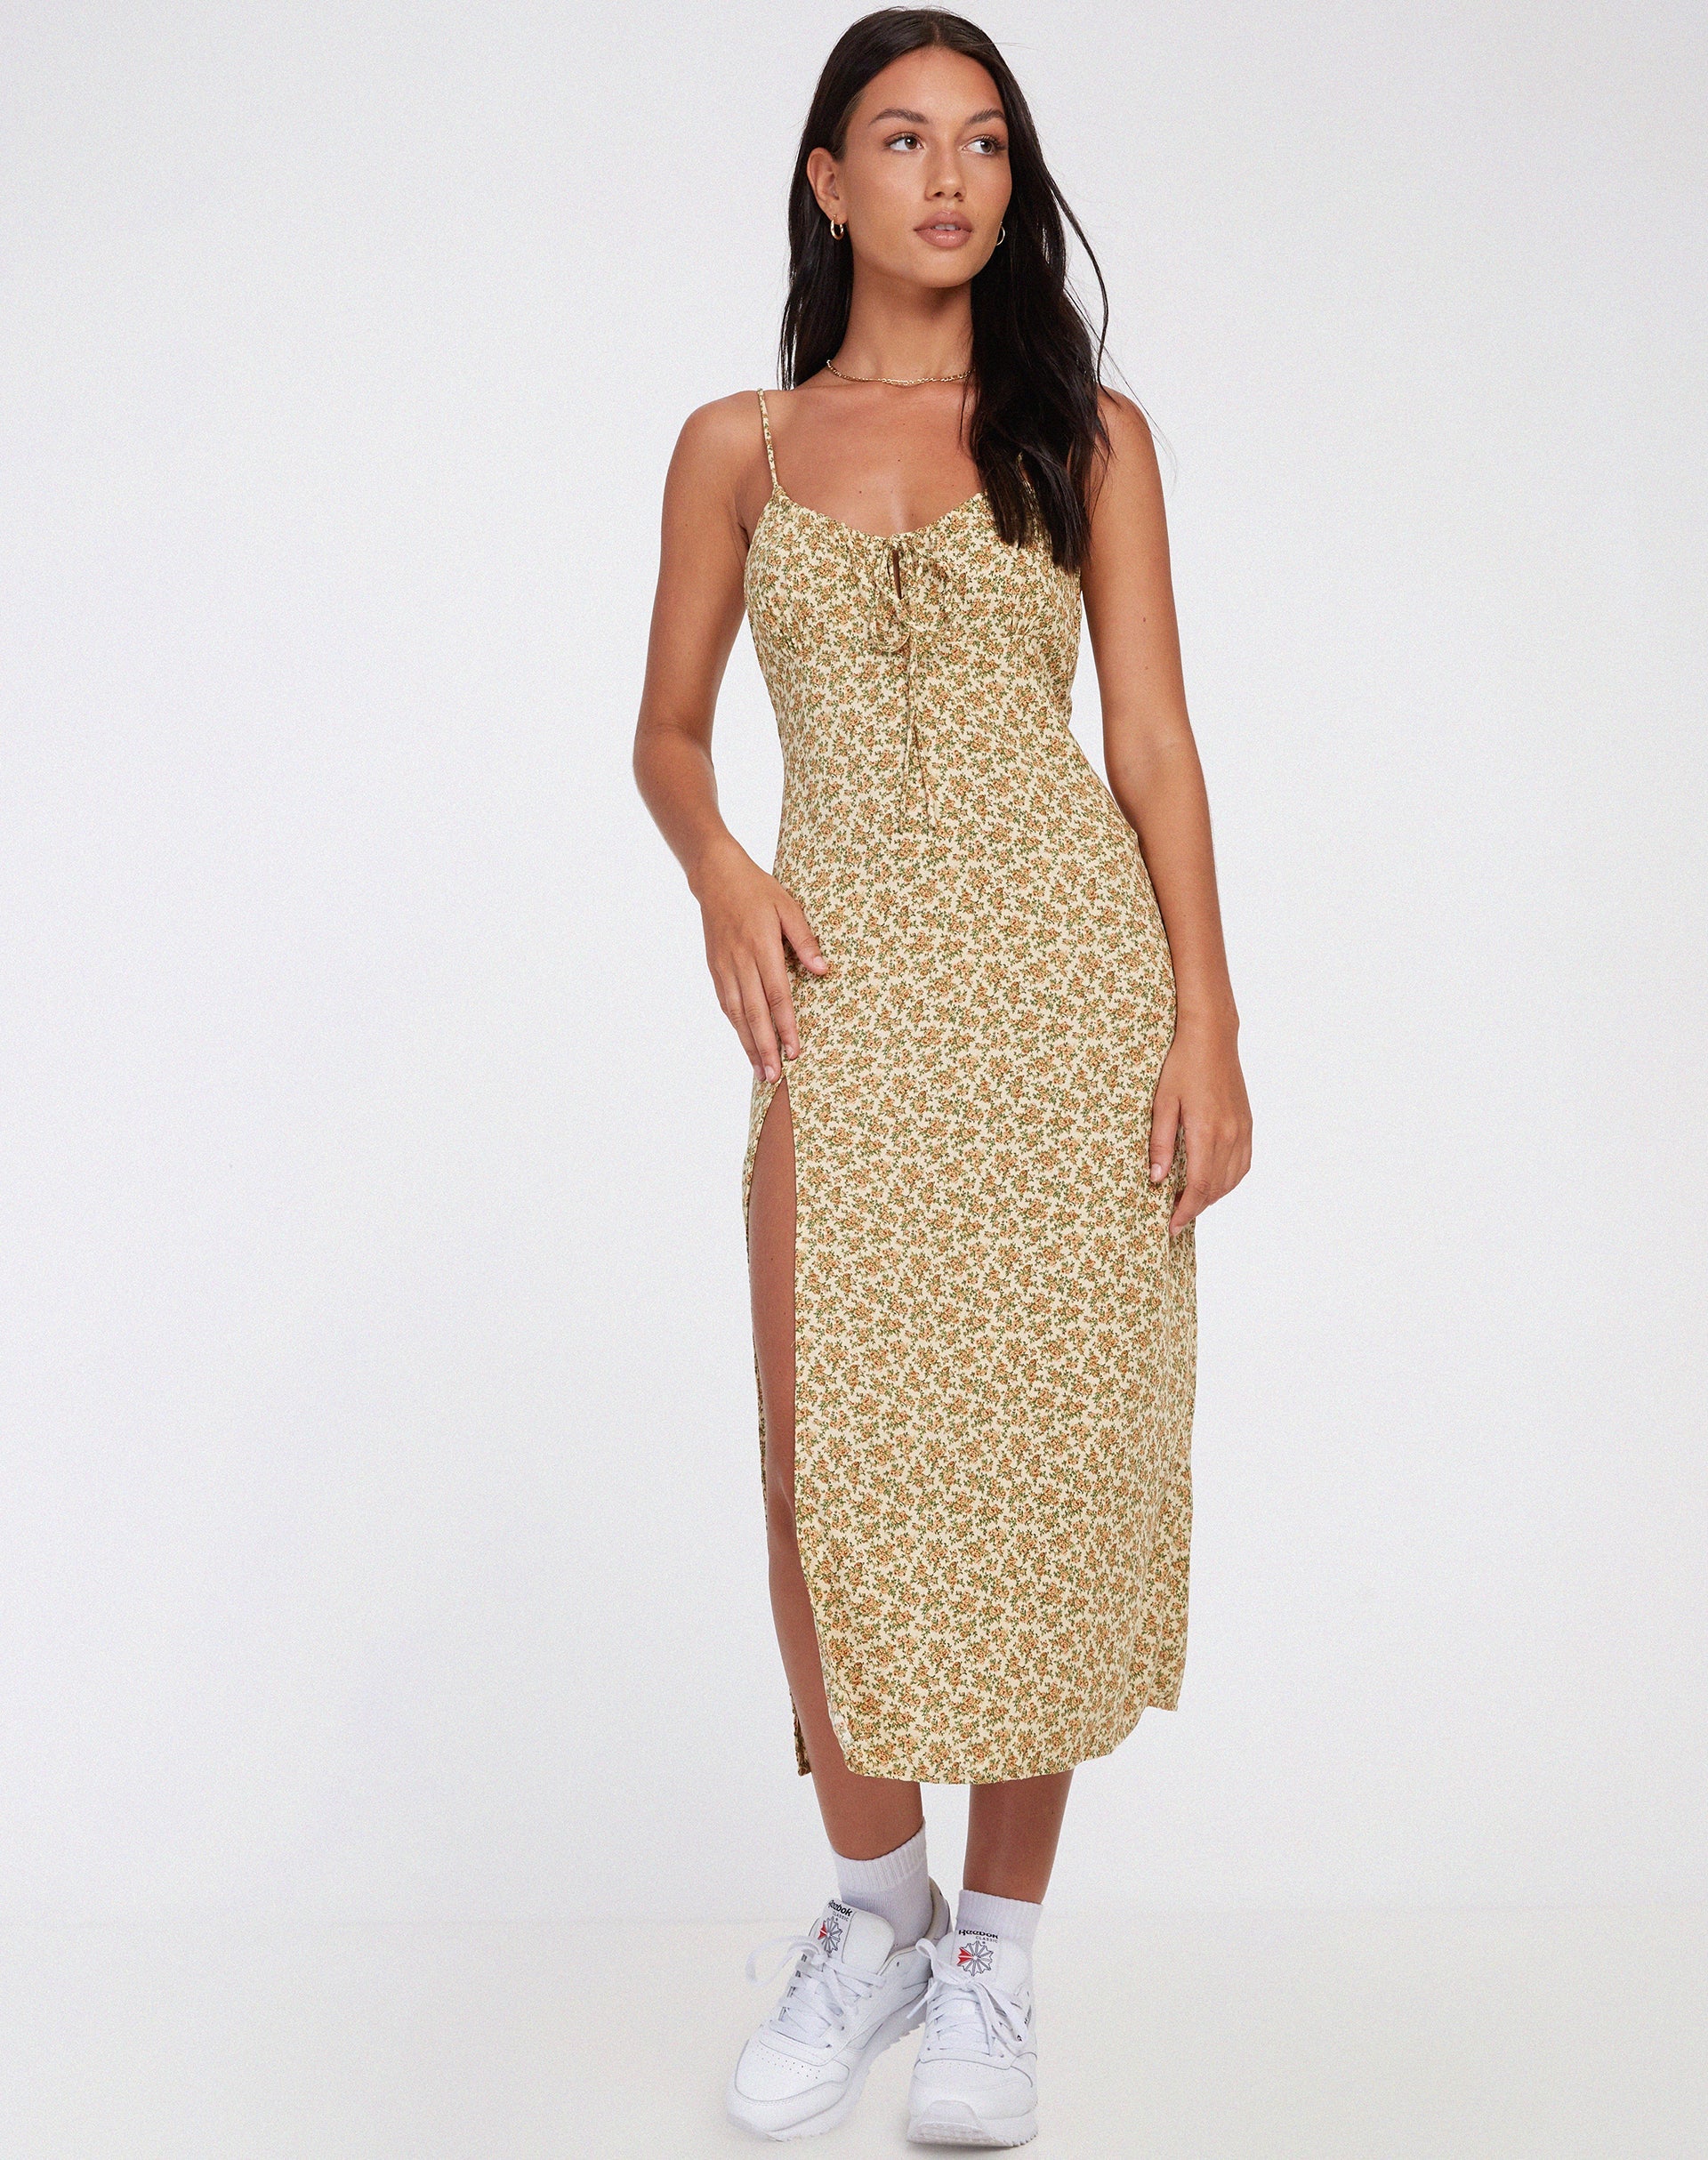 image of Cypress Midi Dress in Washed Ditsy